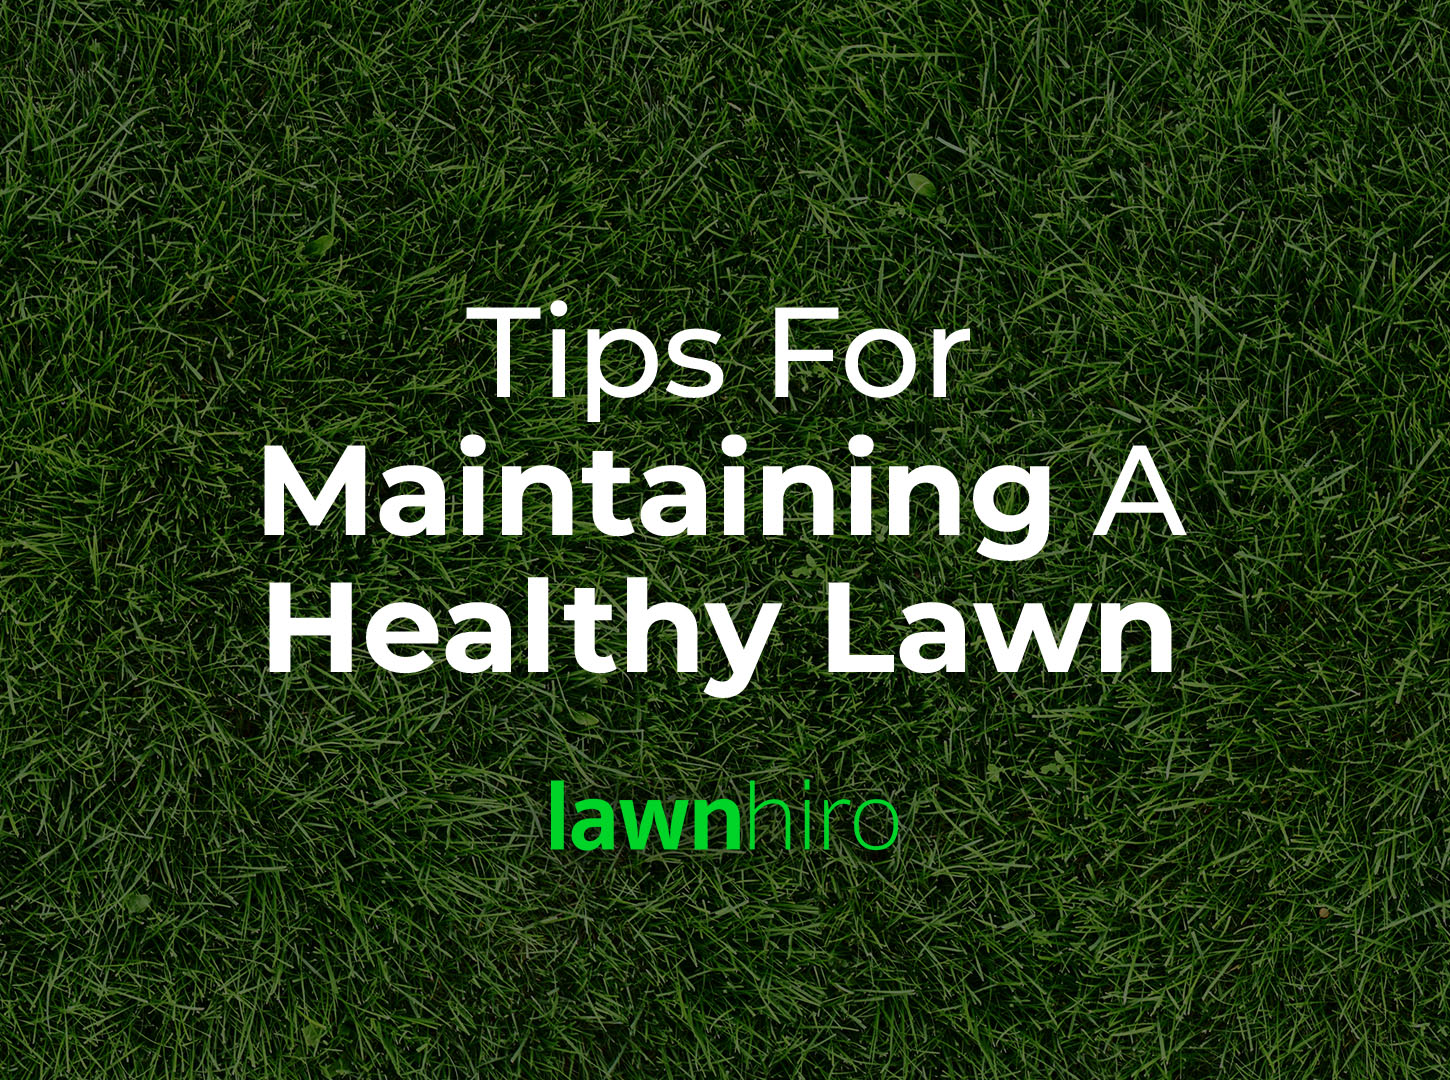 Featured image for “Tips for Lawn Care”